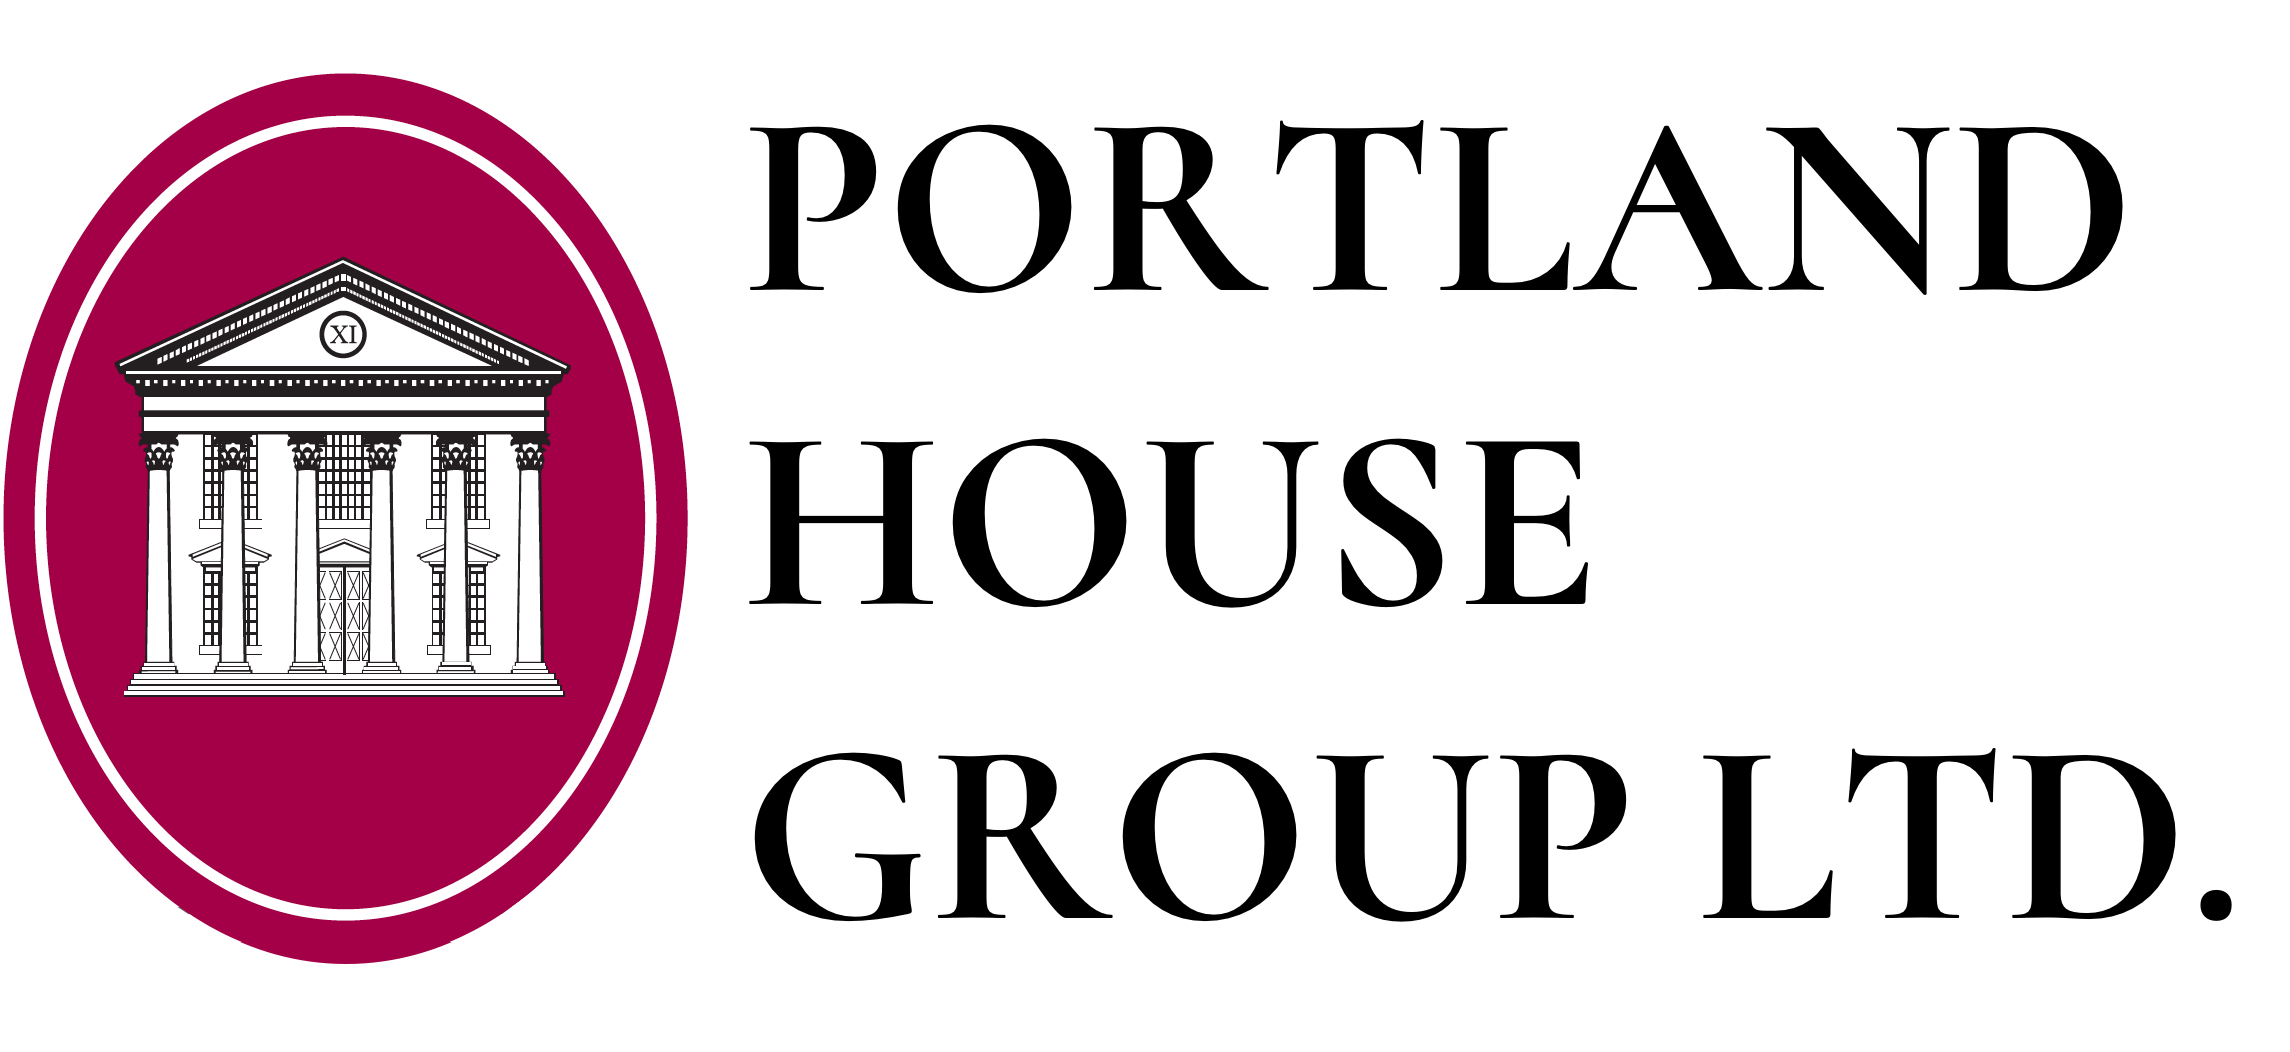 Selling a property with sitting tenants | Sell rental property with tenants | Portland House Group Ltd